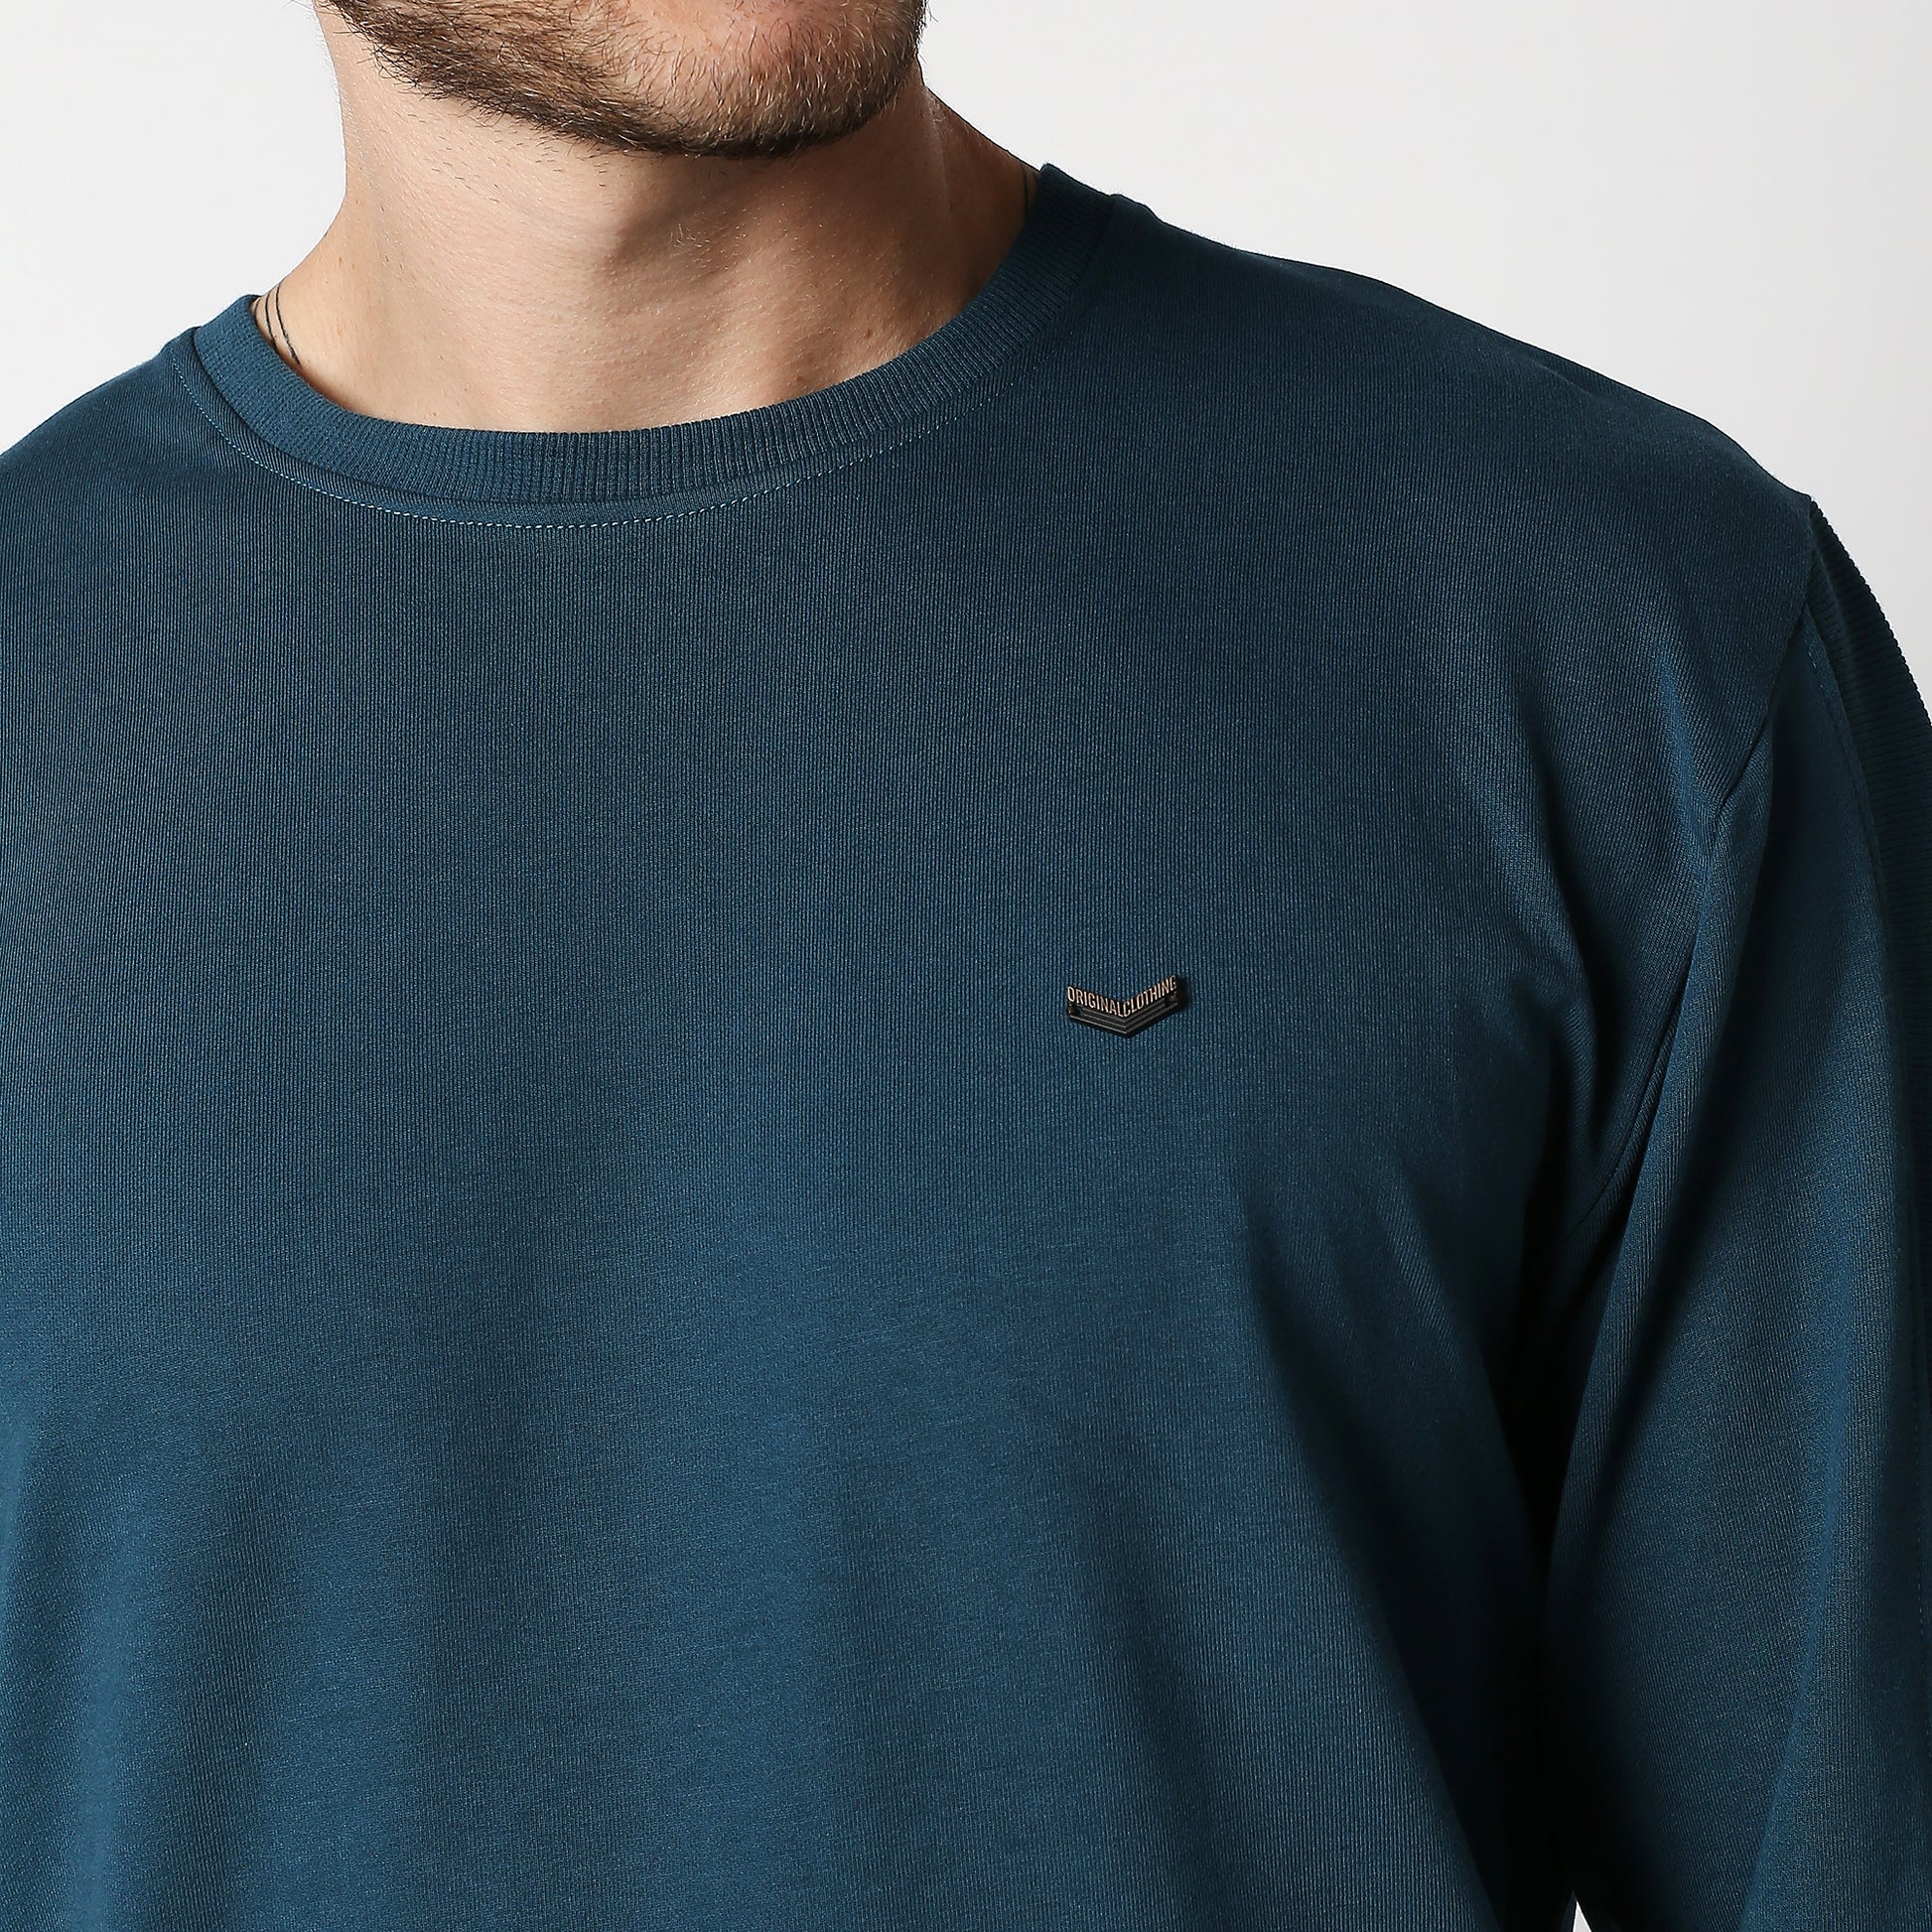 Fostino Teal Blue Pullover Full Sleeves T-Shirt with Rib on Sleeves - Fostino - T-Shirts